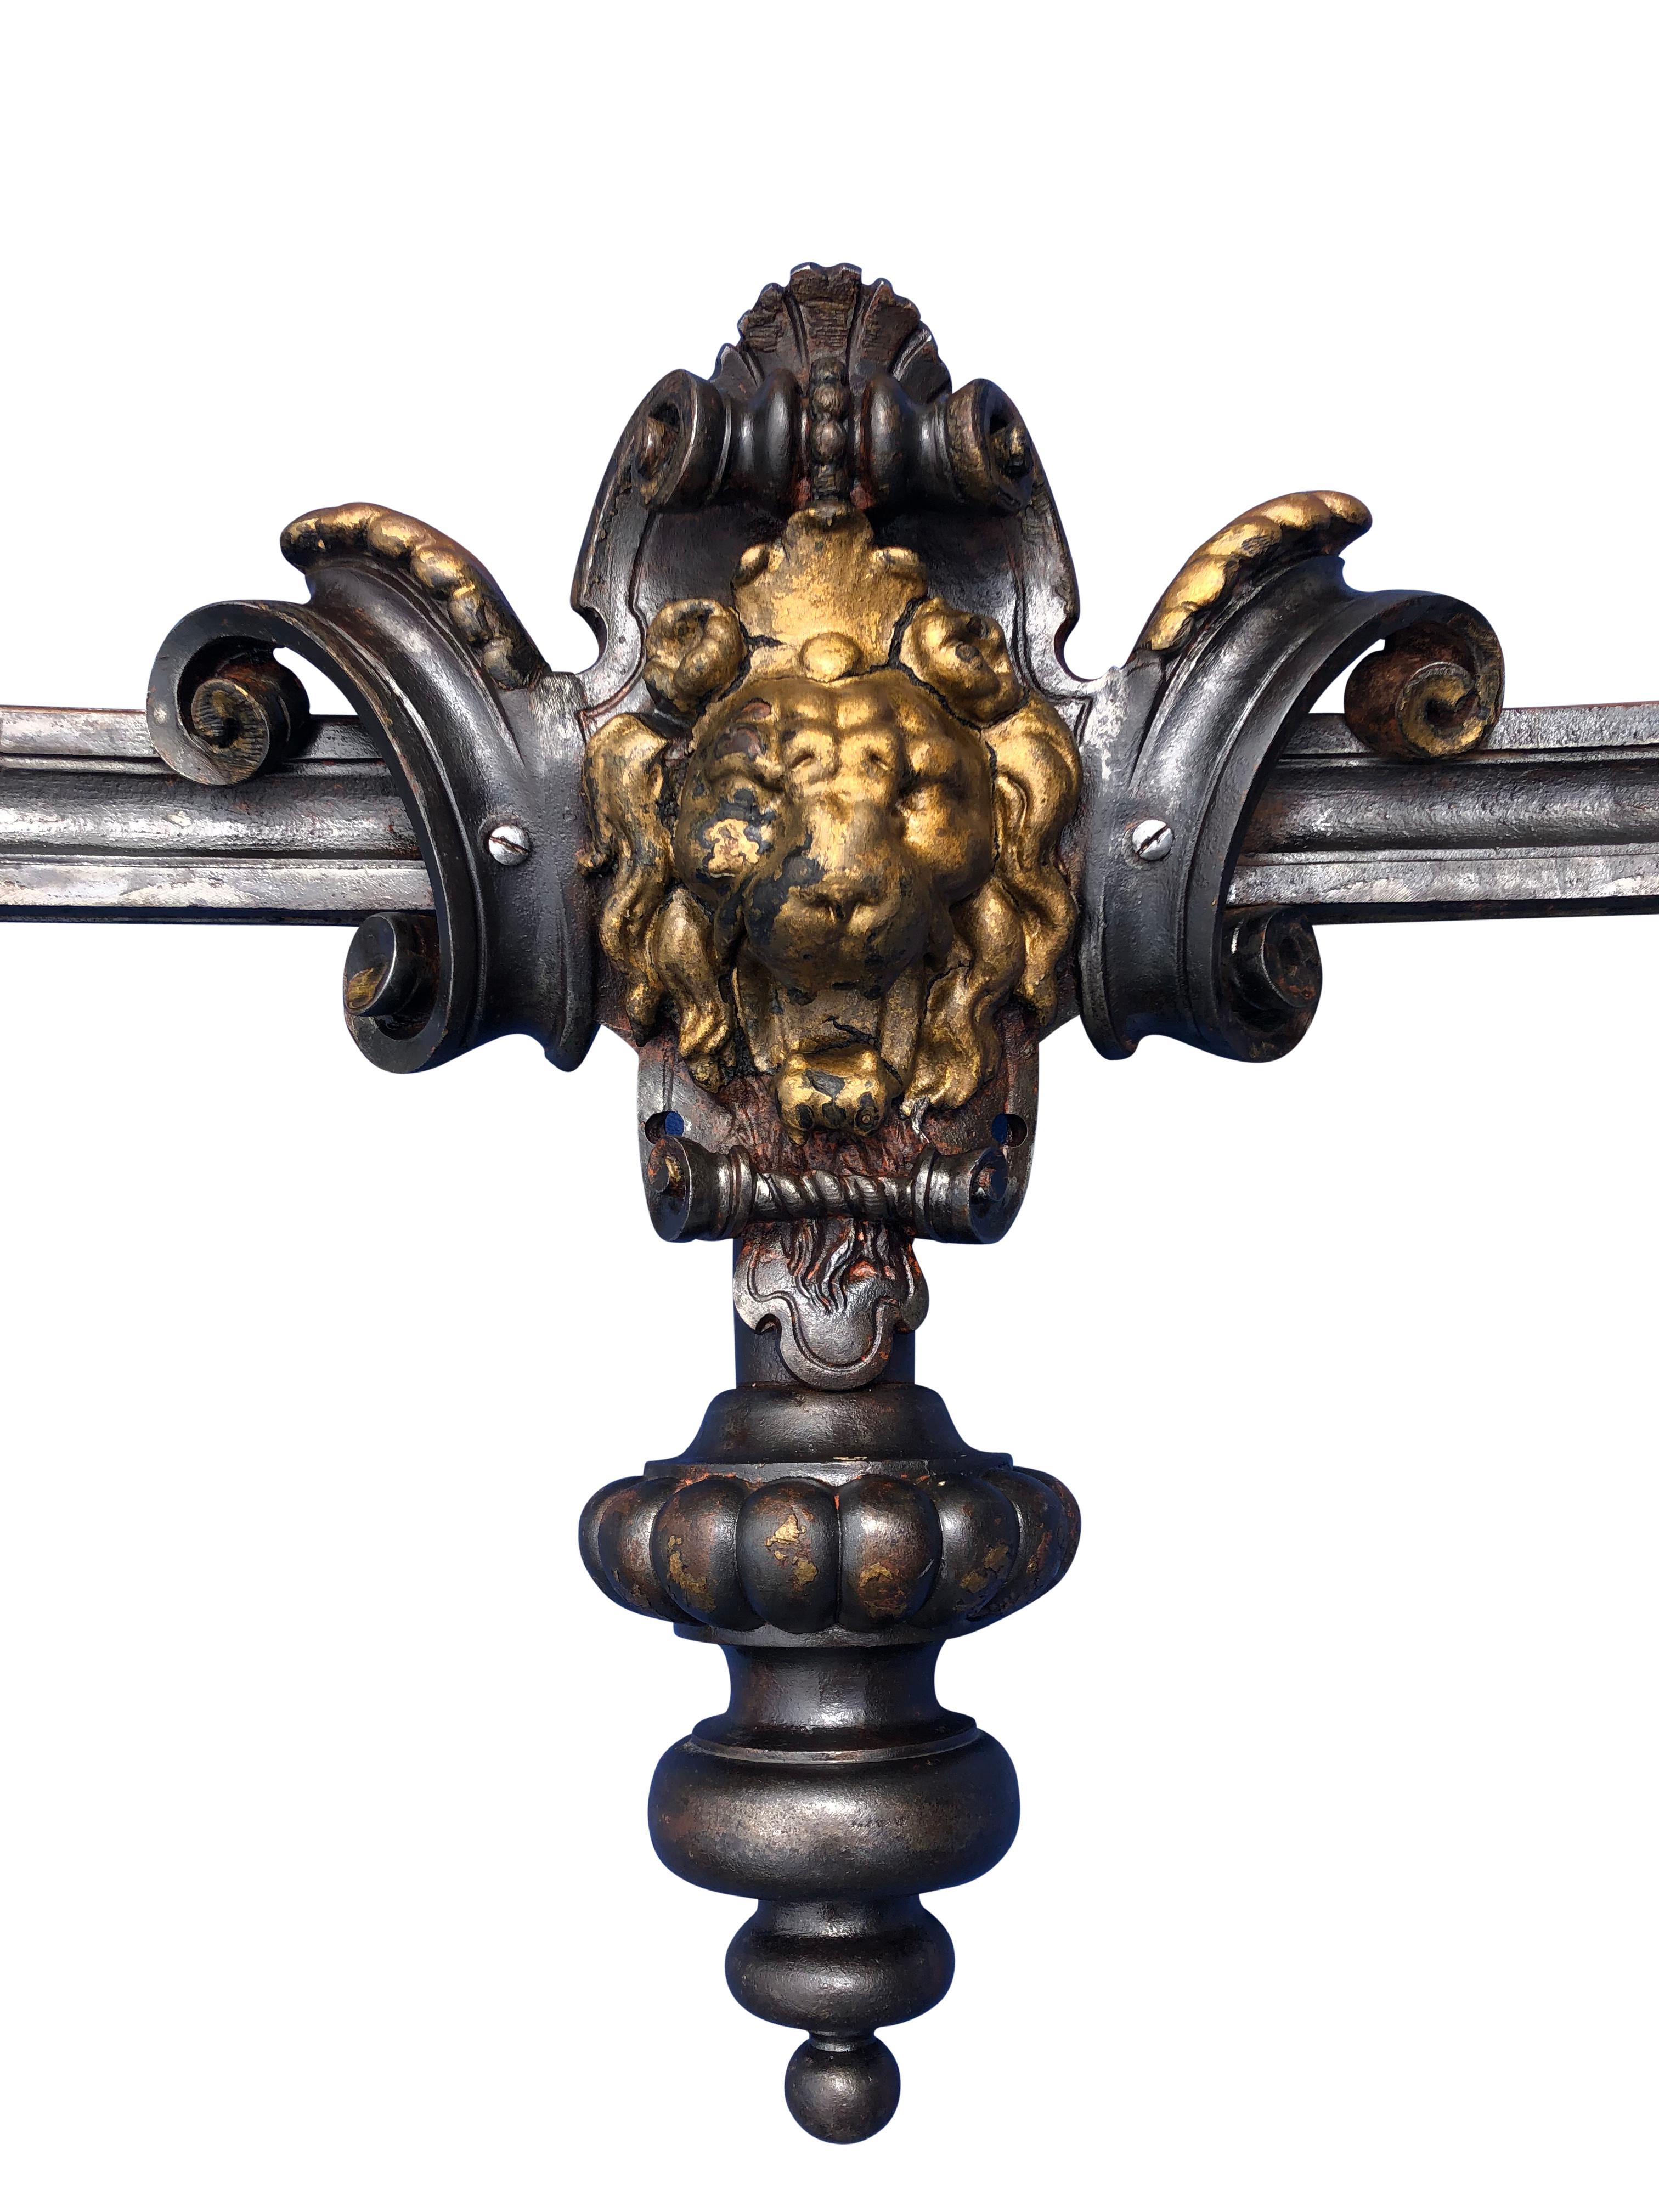 This is truly a one of a kind light. It is from late 19th century France and is made of solid forged iron with an intricately designed brass lion head and two attached decorative arms with brass cone tops and brass details that hold the lights. The